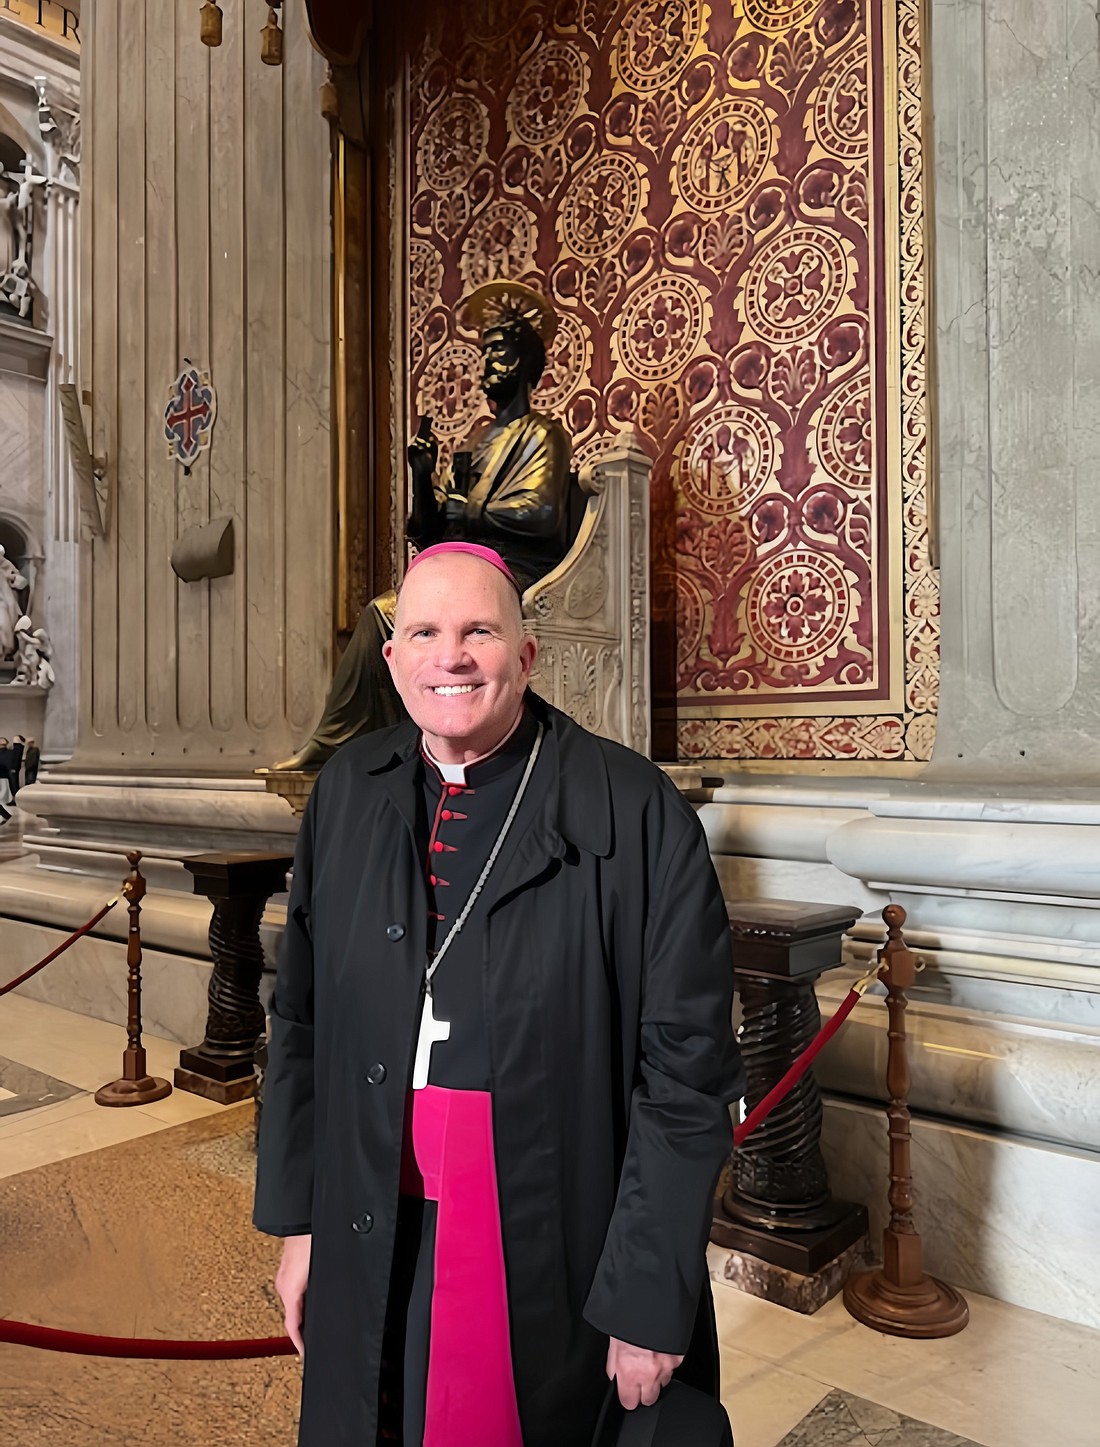 Bishop O'Connell stands in front of the Chair of St. Peter in St. Peter Basilica, Rome Jan. 2. On Jan. 4, the Bishop will begin to lead a pilgrimage for 20 priests of the Diocese and two diocesan staff. Staff photo